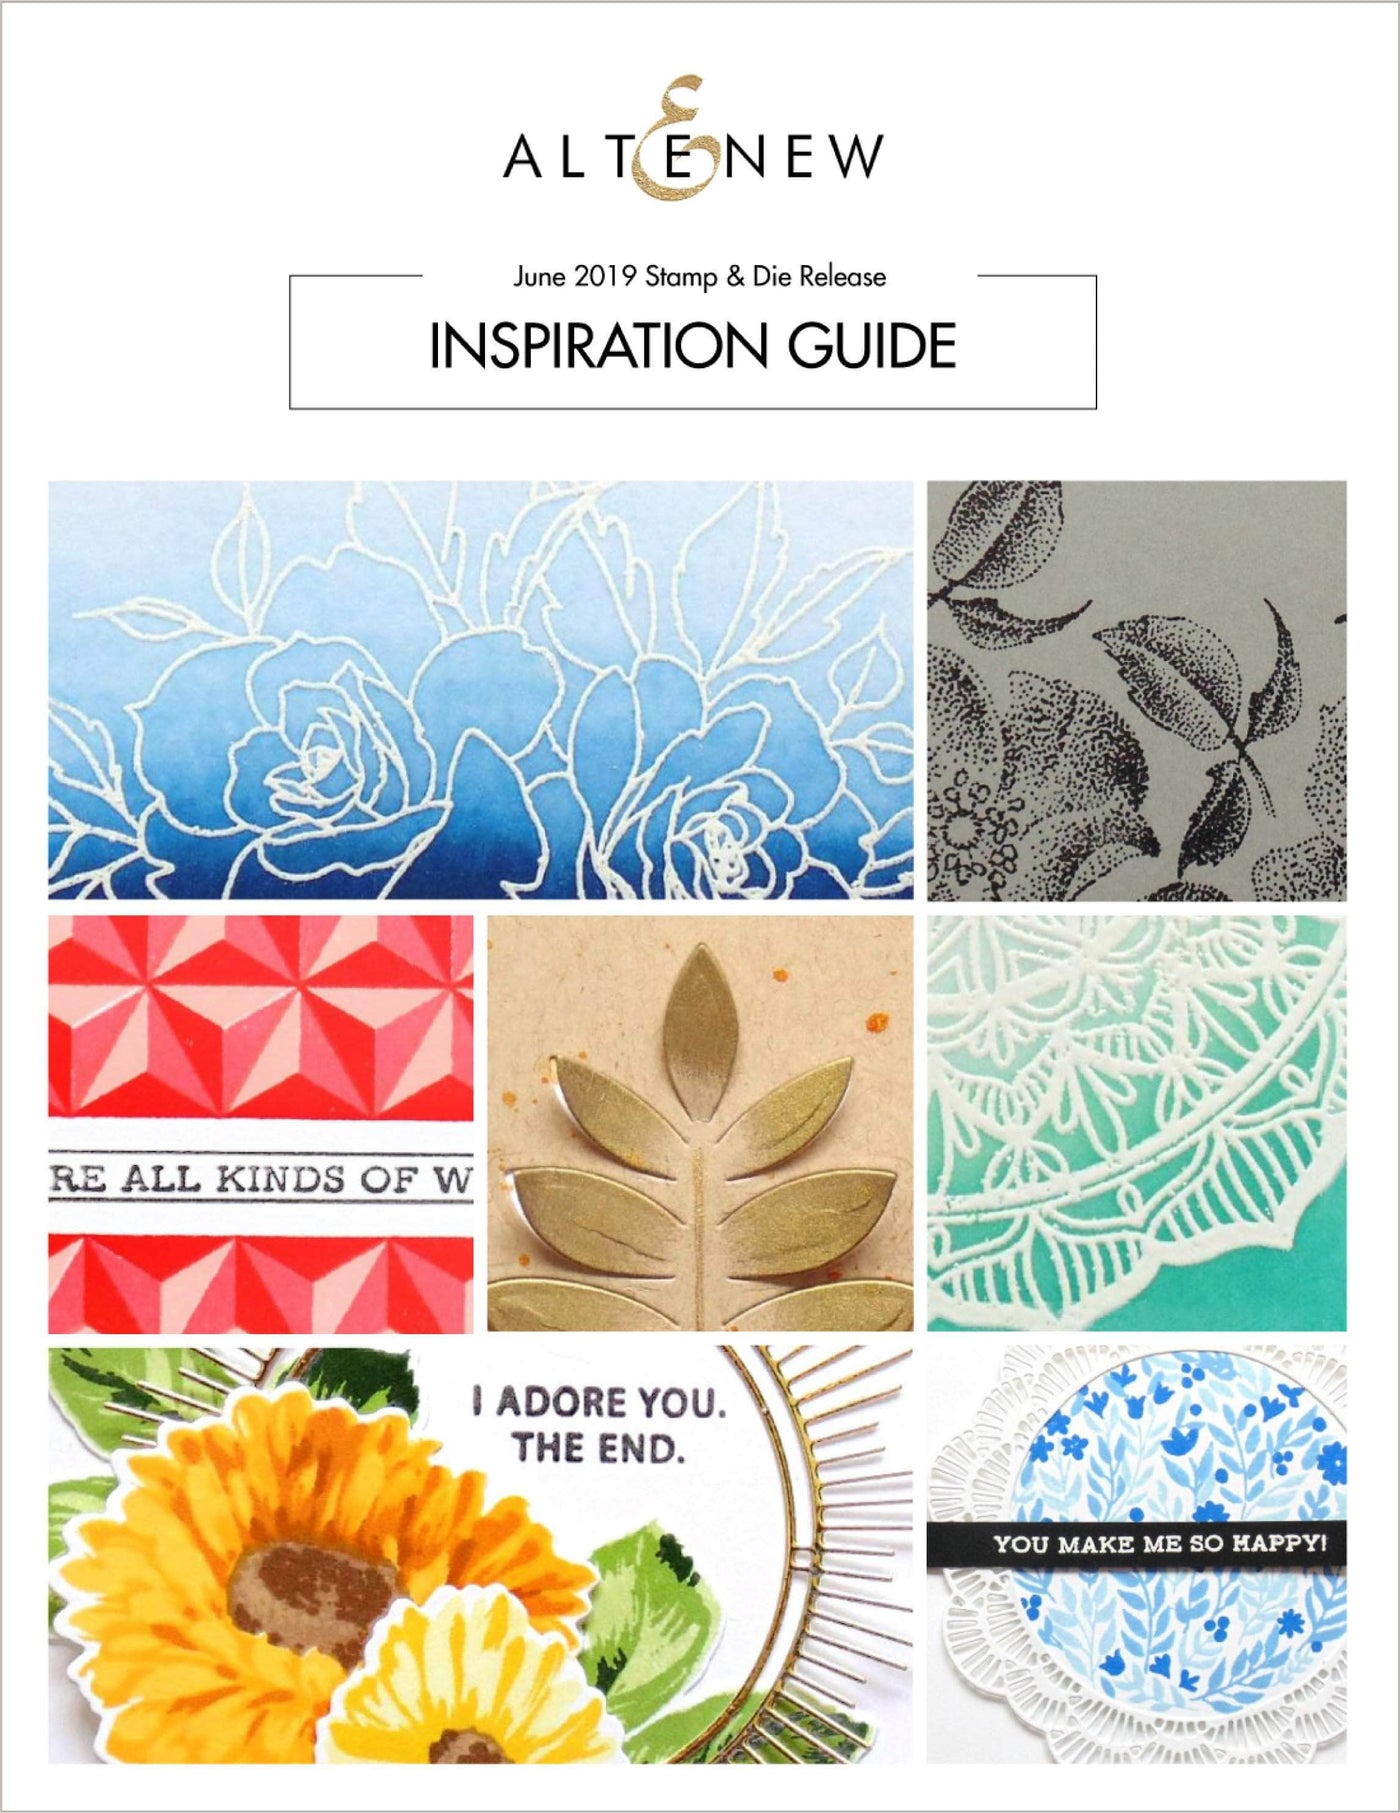 55Printing.com Printed Media A Welcome Reverie Stamp & Die Release Inspiration Guide